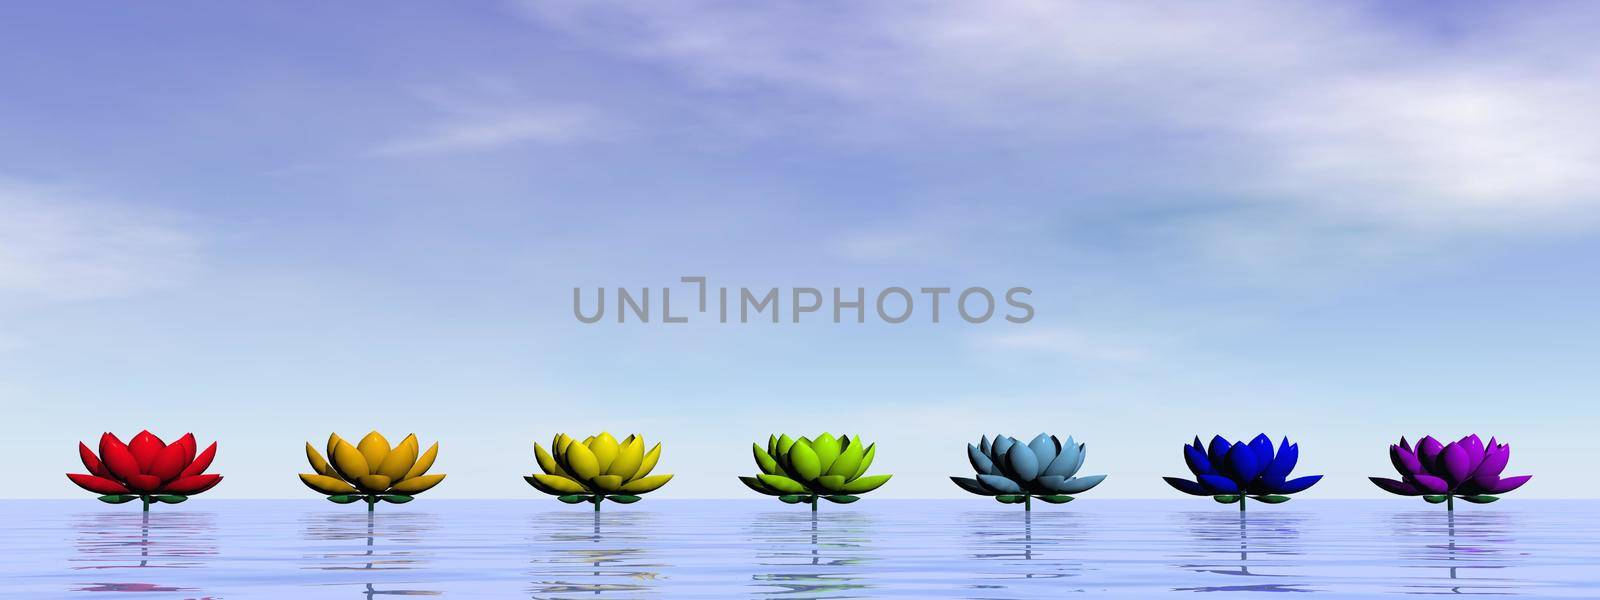 Lily flowers with chakra colors upon water by day sky